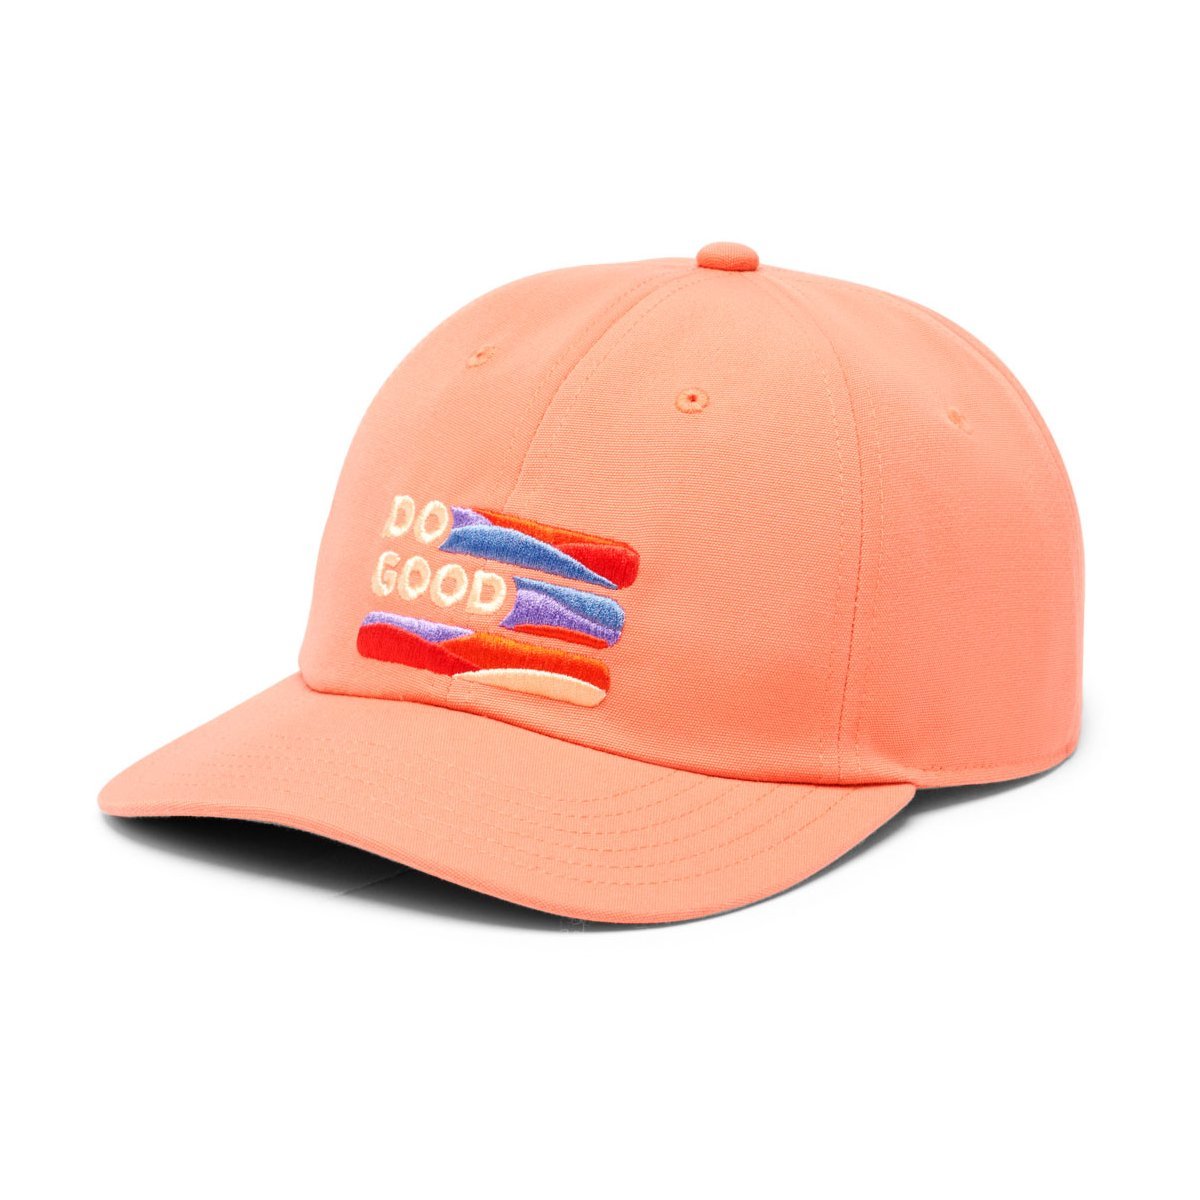 Cotopaxi Do Good Dad Hat - cappello lifestyle - Neverland Firenze